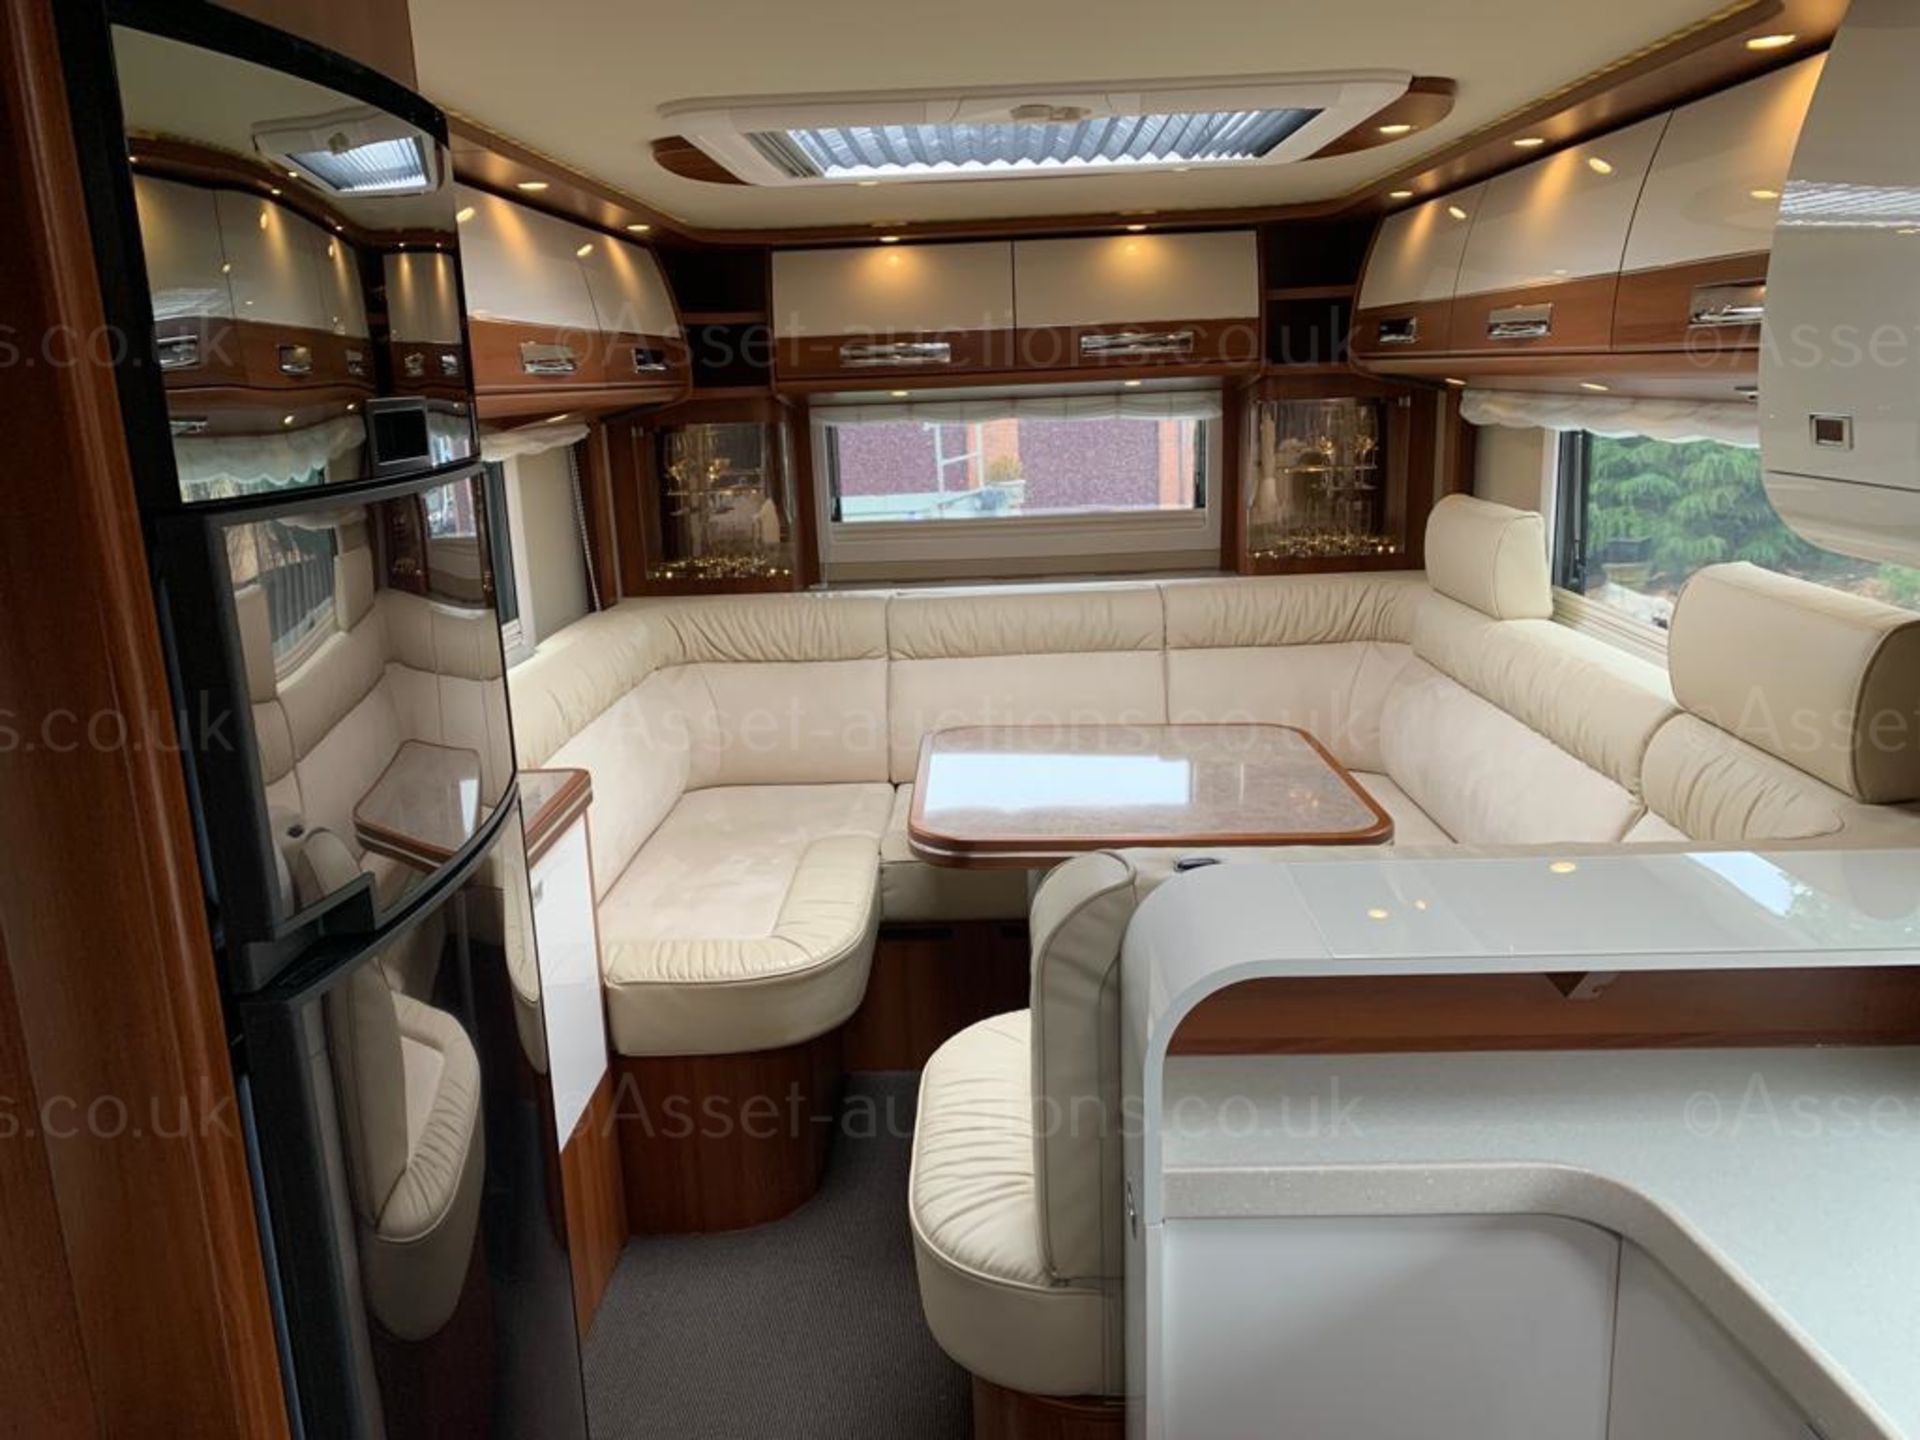 2020 CARTHAGO LINER-FOR-TWO 53L MOTORHOME, SHOWING 4529 MILES, MINT CONDITION *NO VAT* - Image 15 of 33